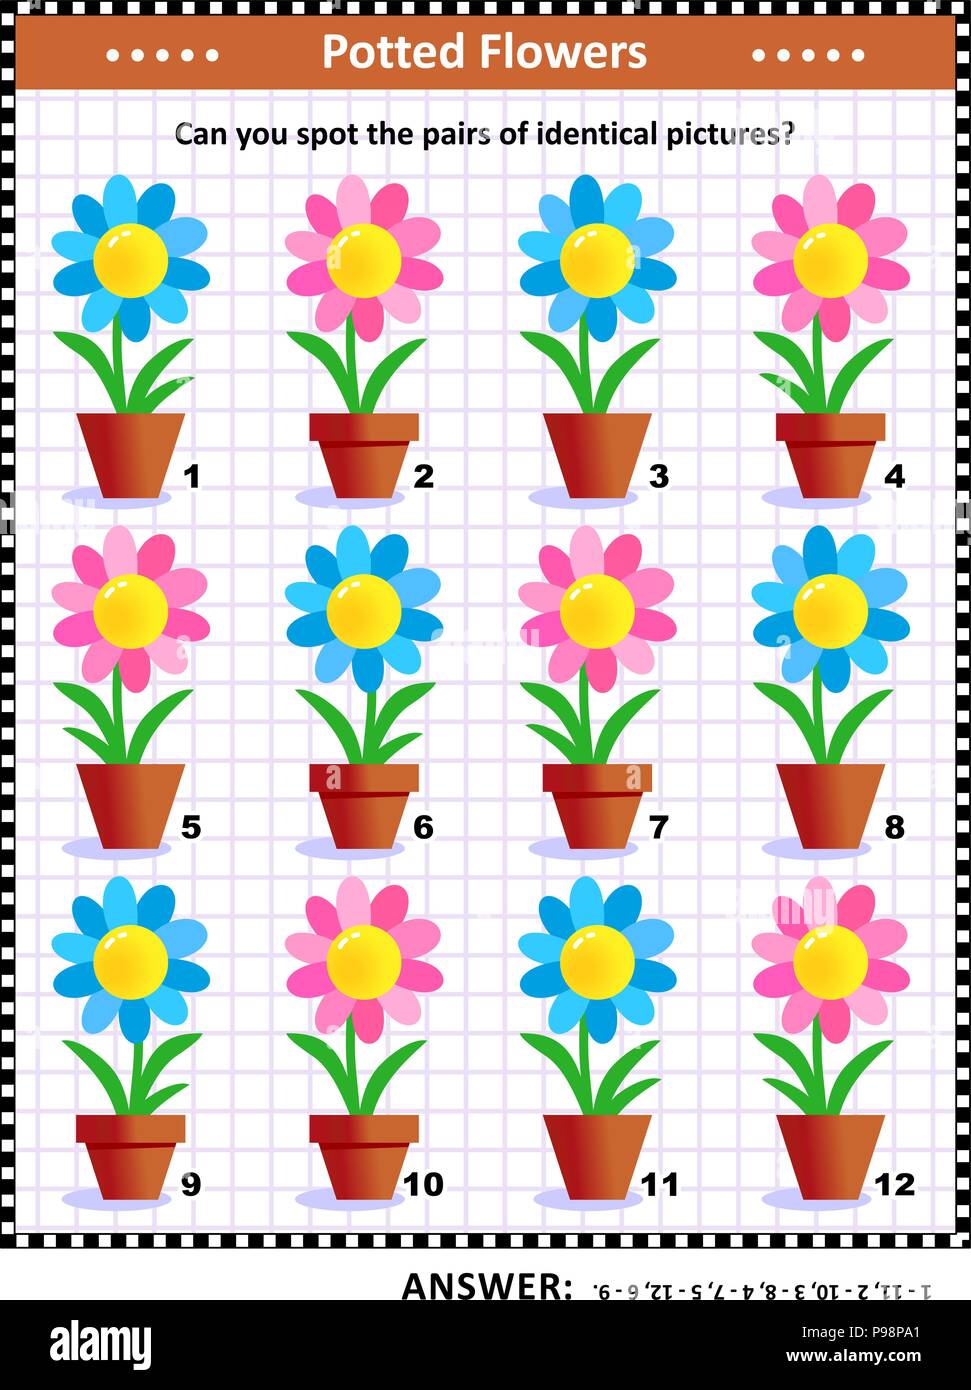 IQ and memory training visual puzzle with potted flowers: Can you spot the pairs of identical pictures? Answer included. Stock Vector